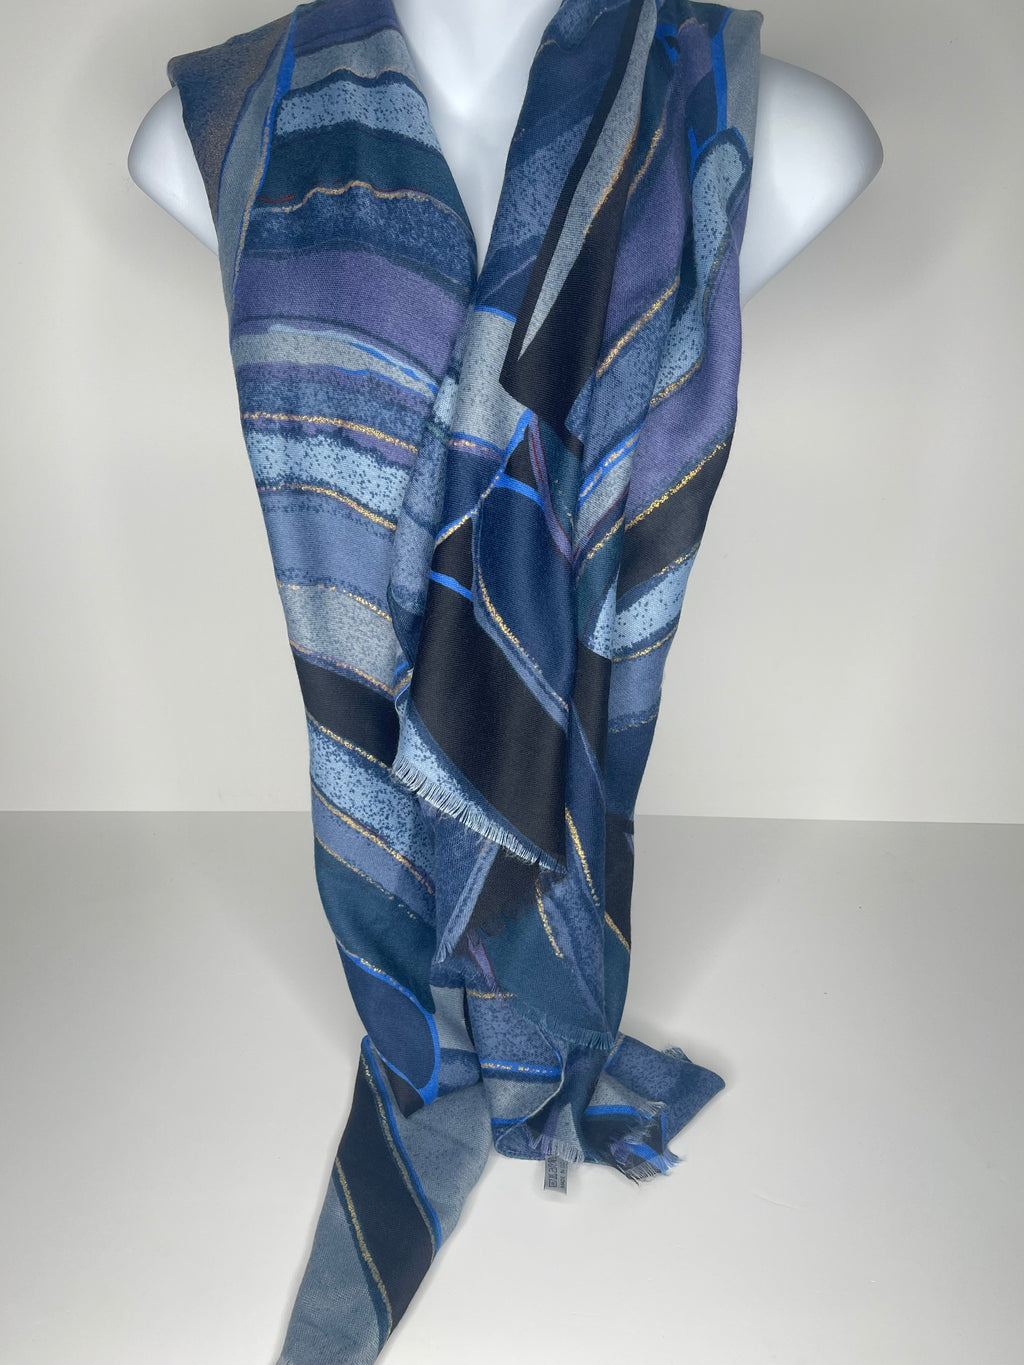 Lighter weight metallic gold line print scarf in shades of blue and black